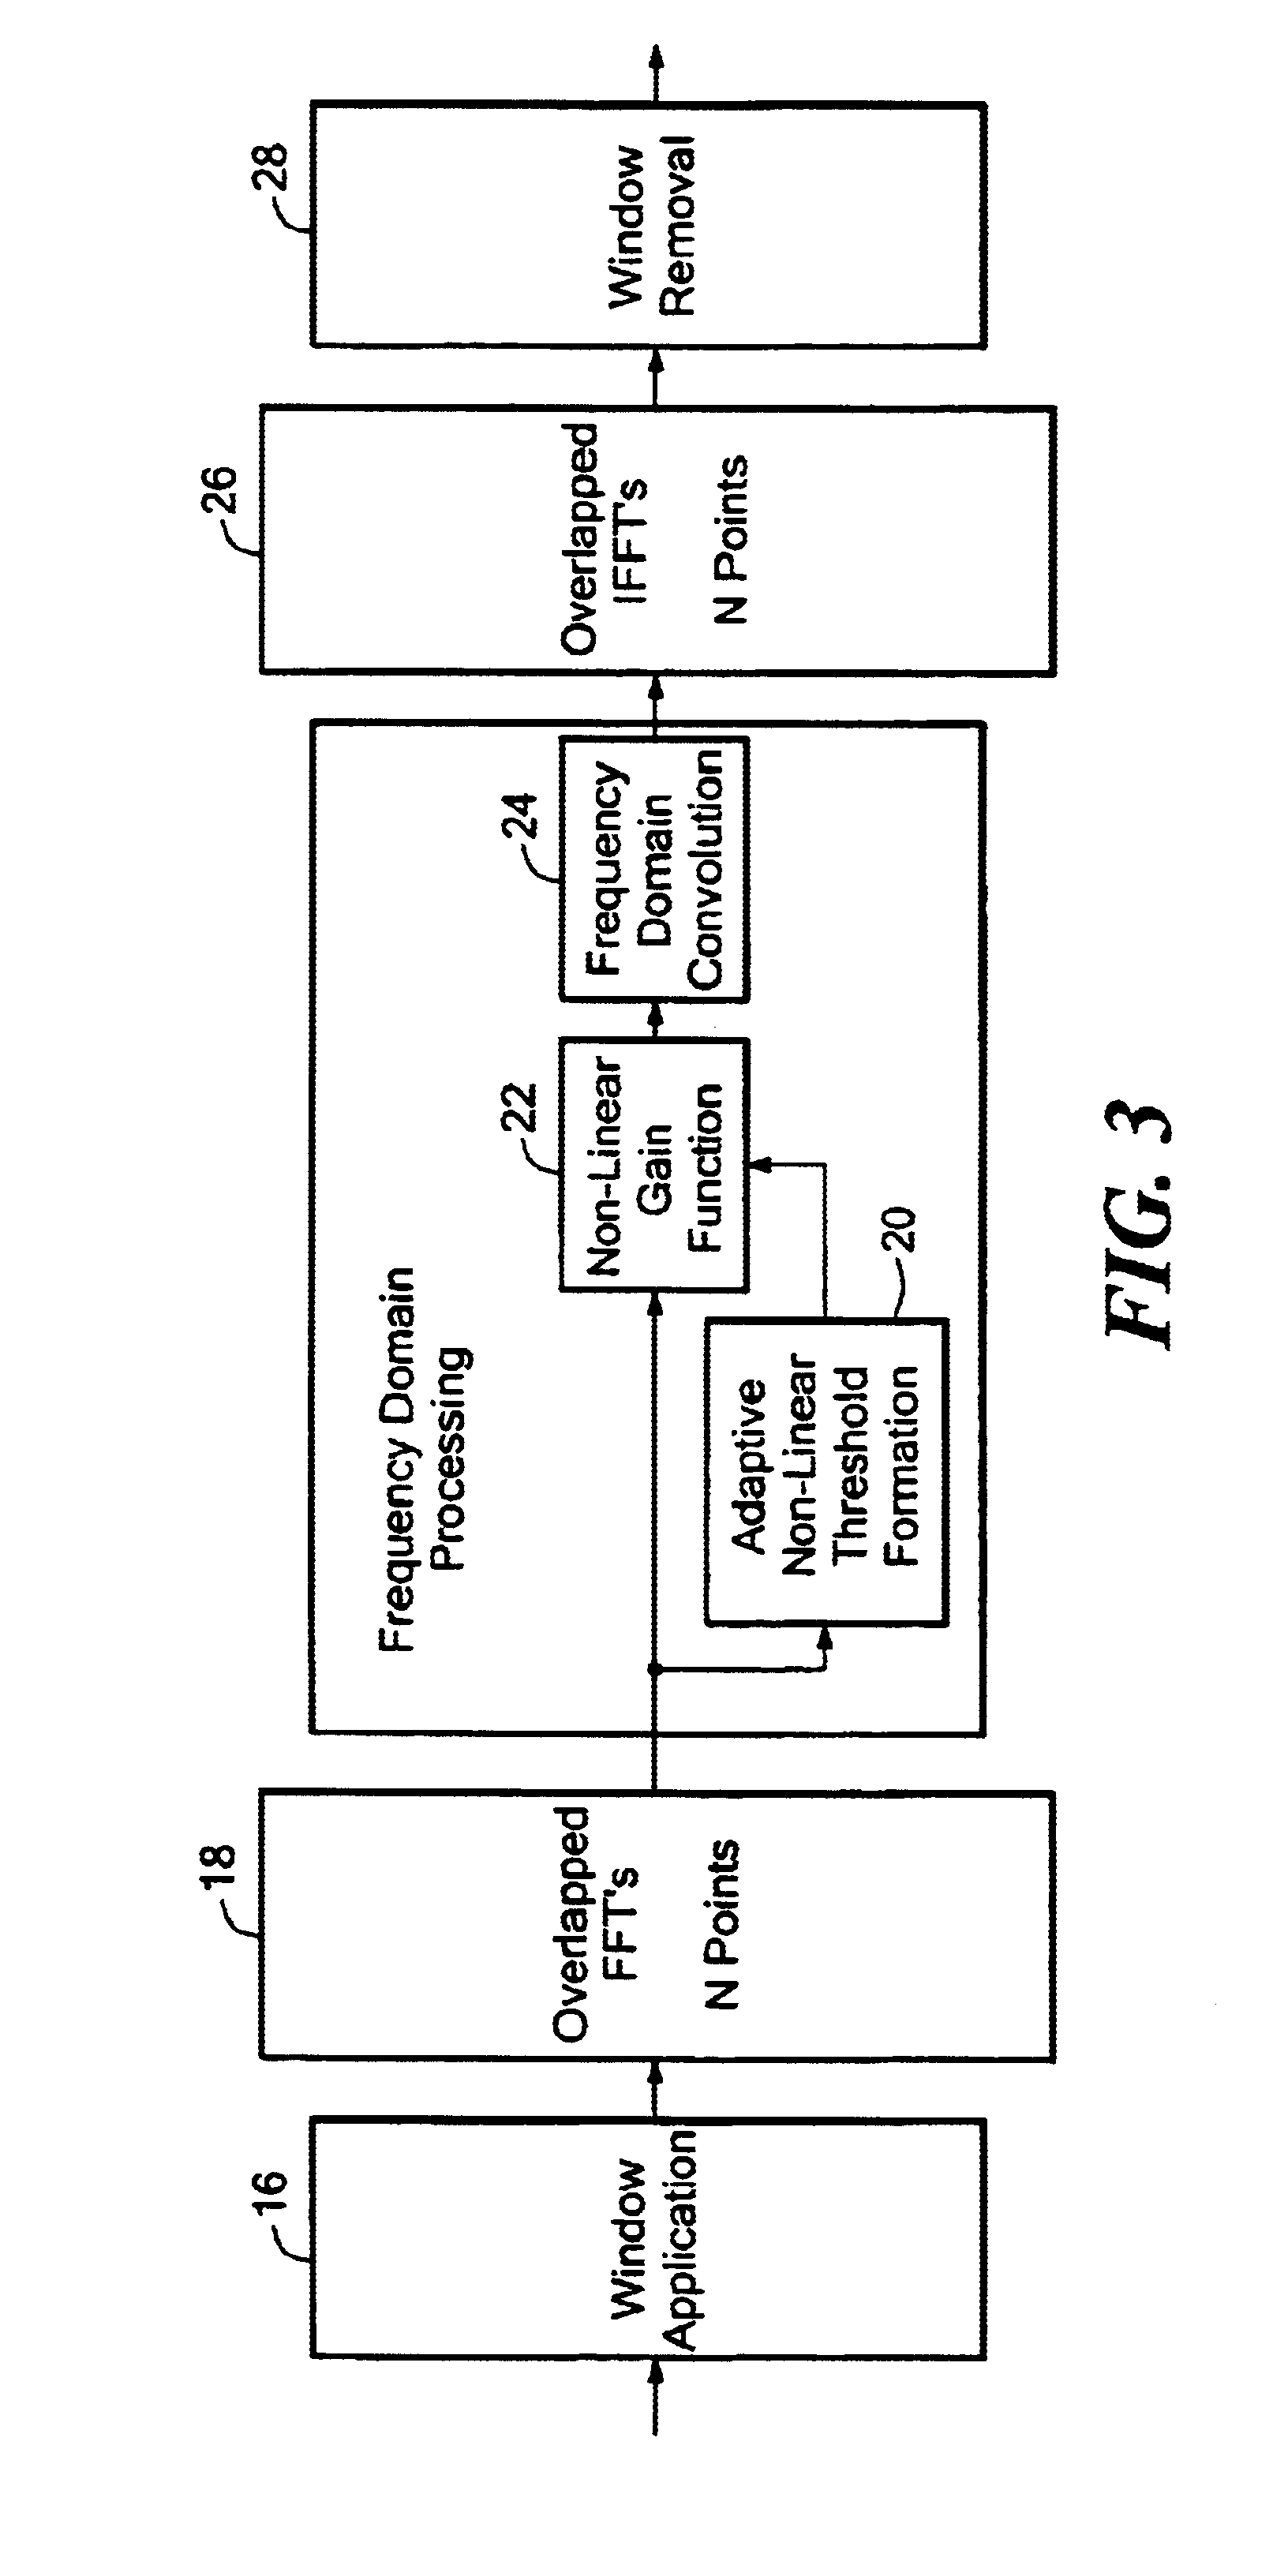 Interference suppression in a spread spectrum communications system using non-linear frequency domain excision